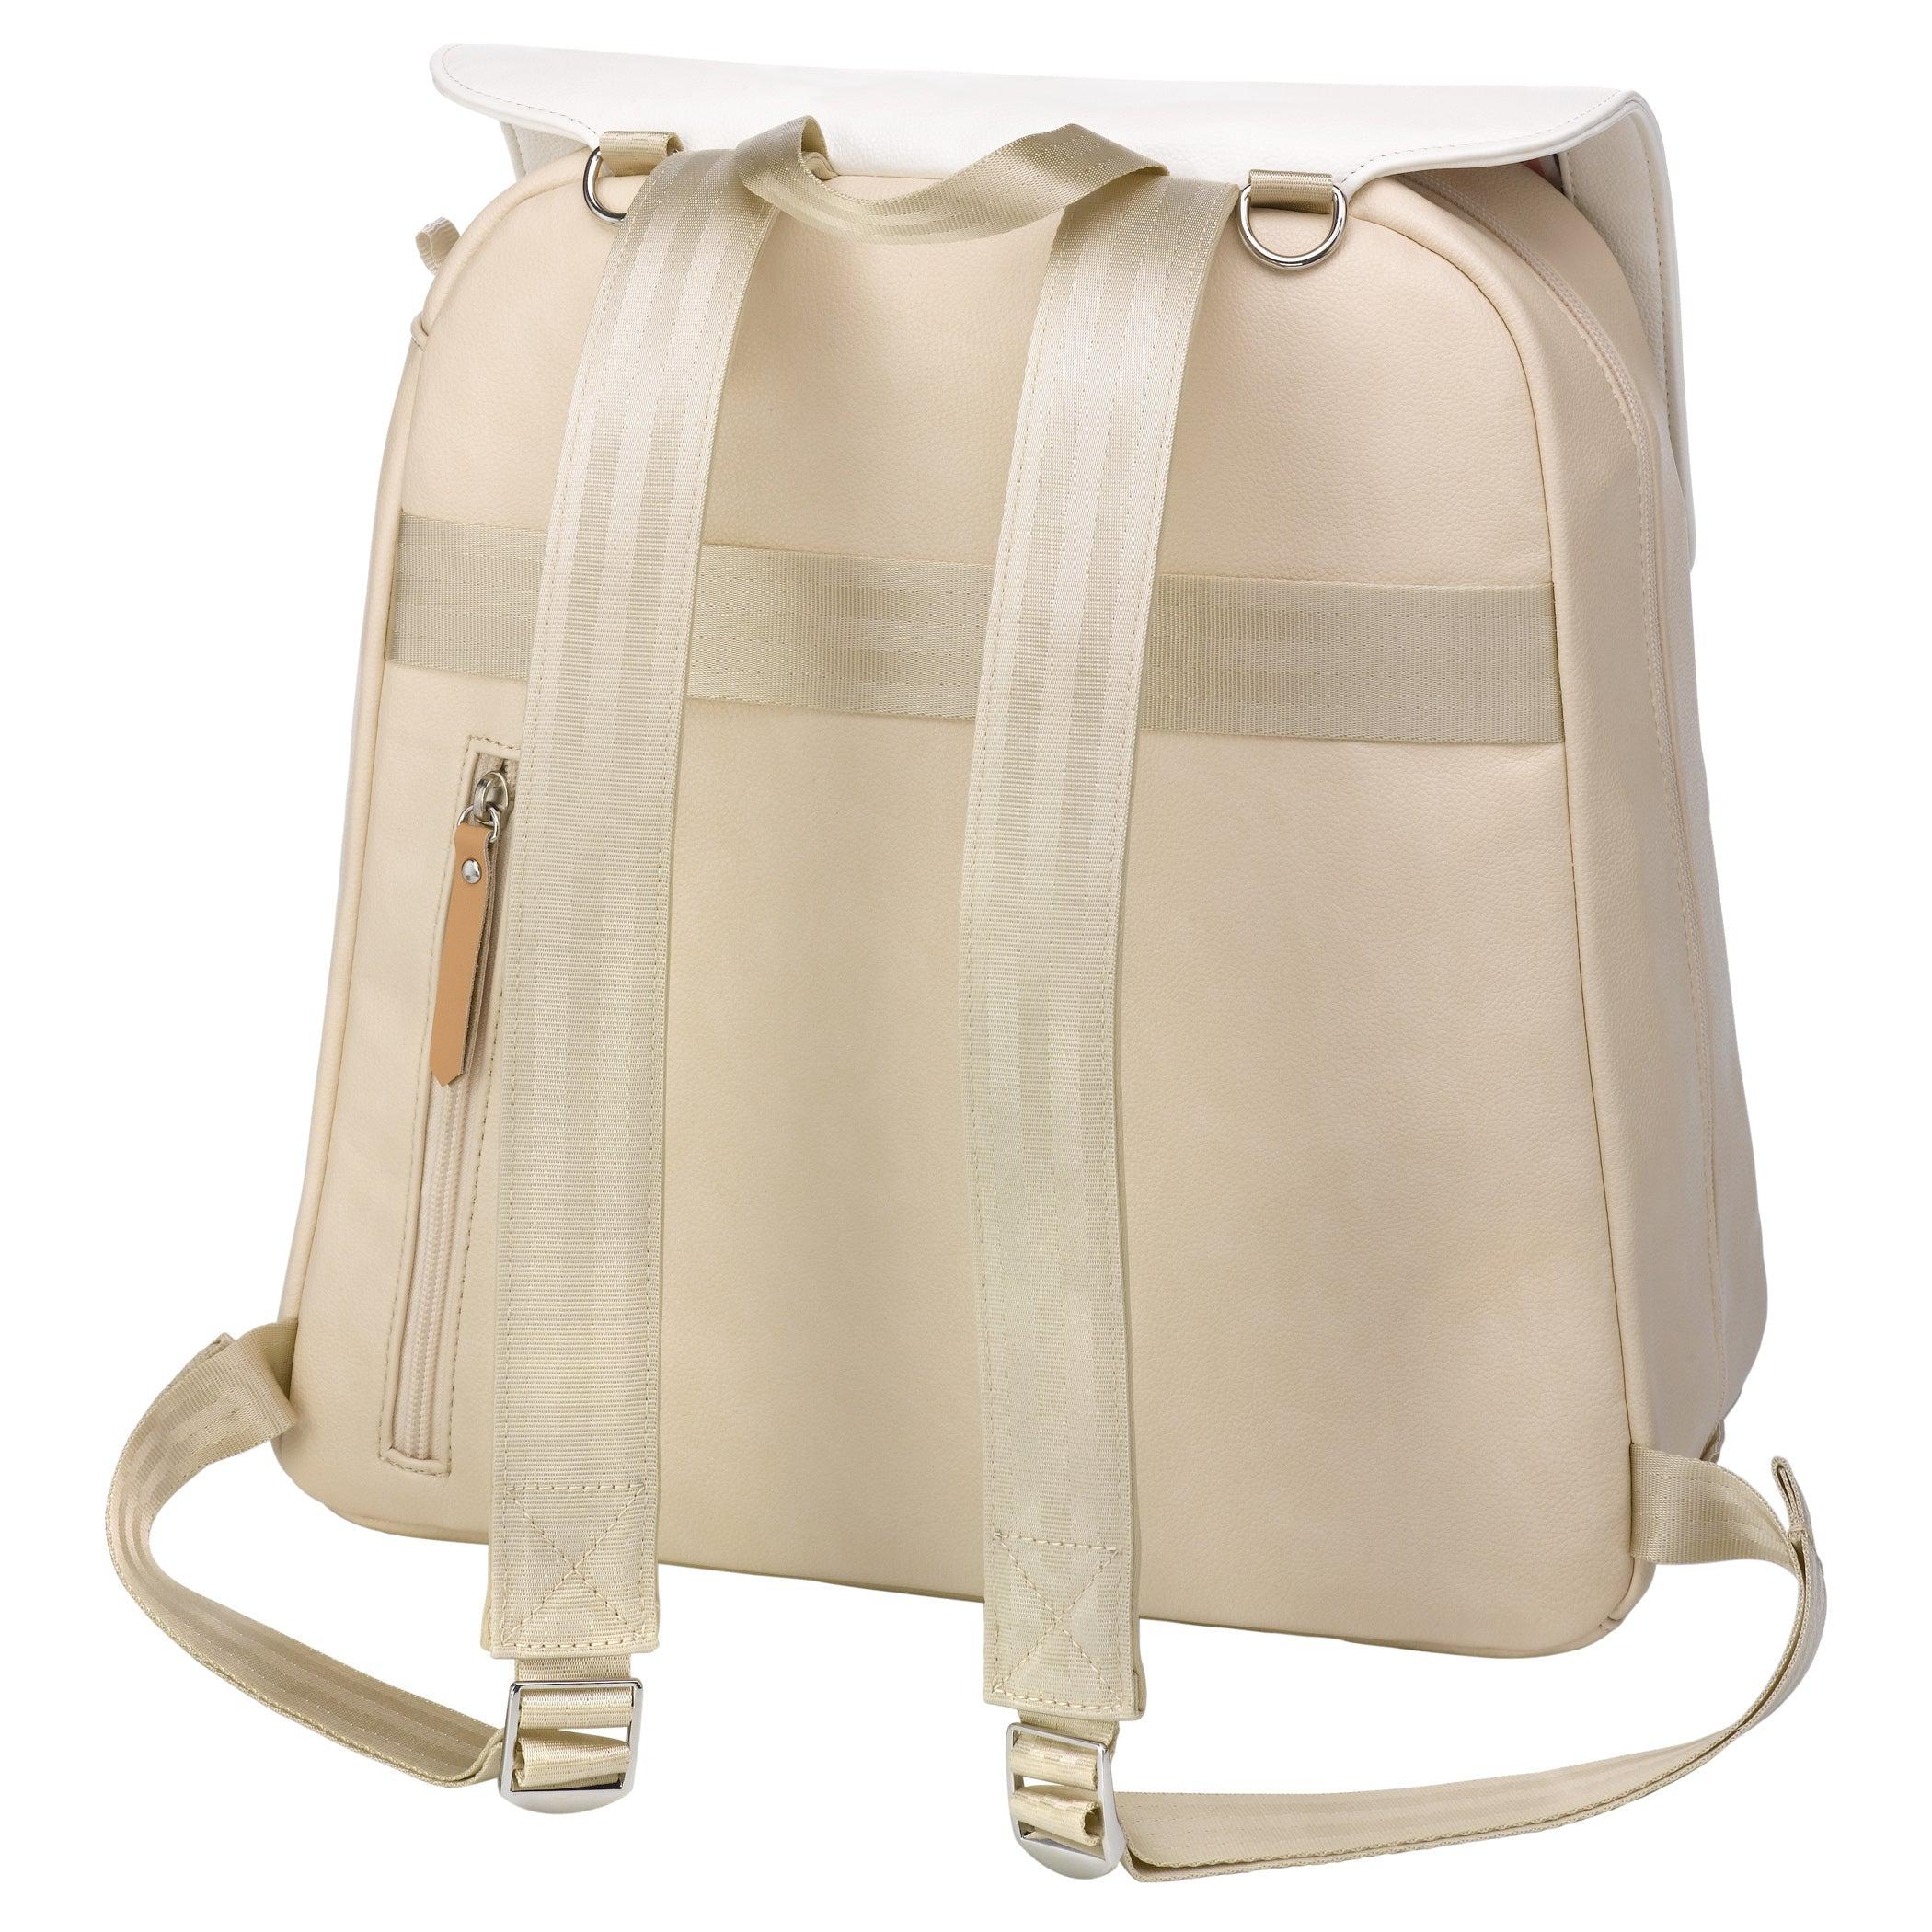 Petunia Pickle Bottom Meta Diaper Backpack in Toasted Marshmallow